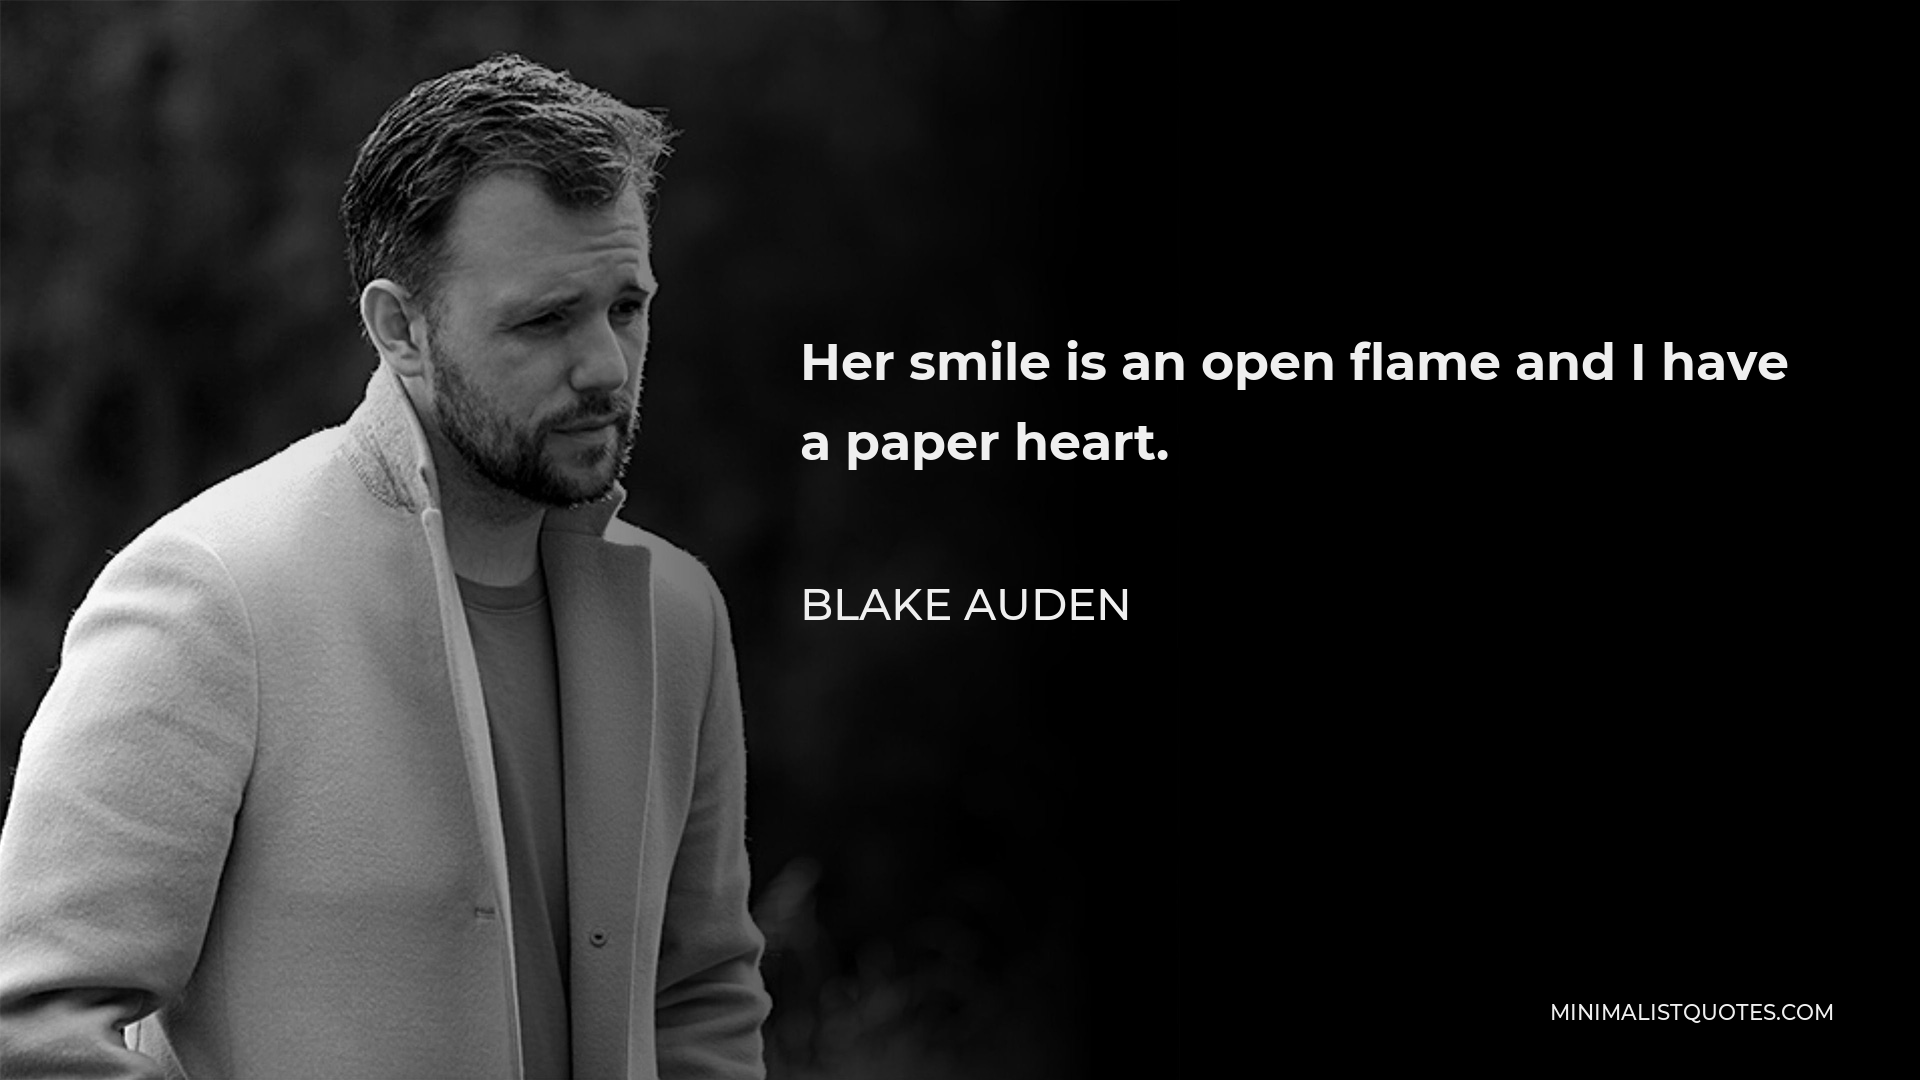 Blake Auden Quote - Her smile is an open flame and I have a paper heart.